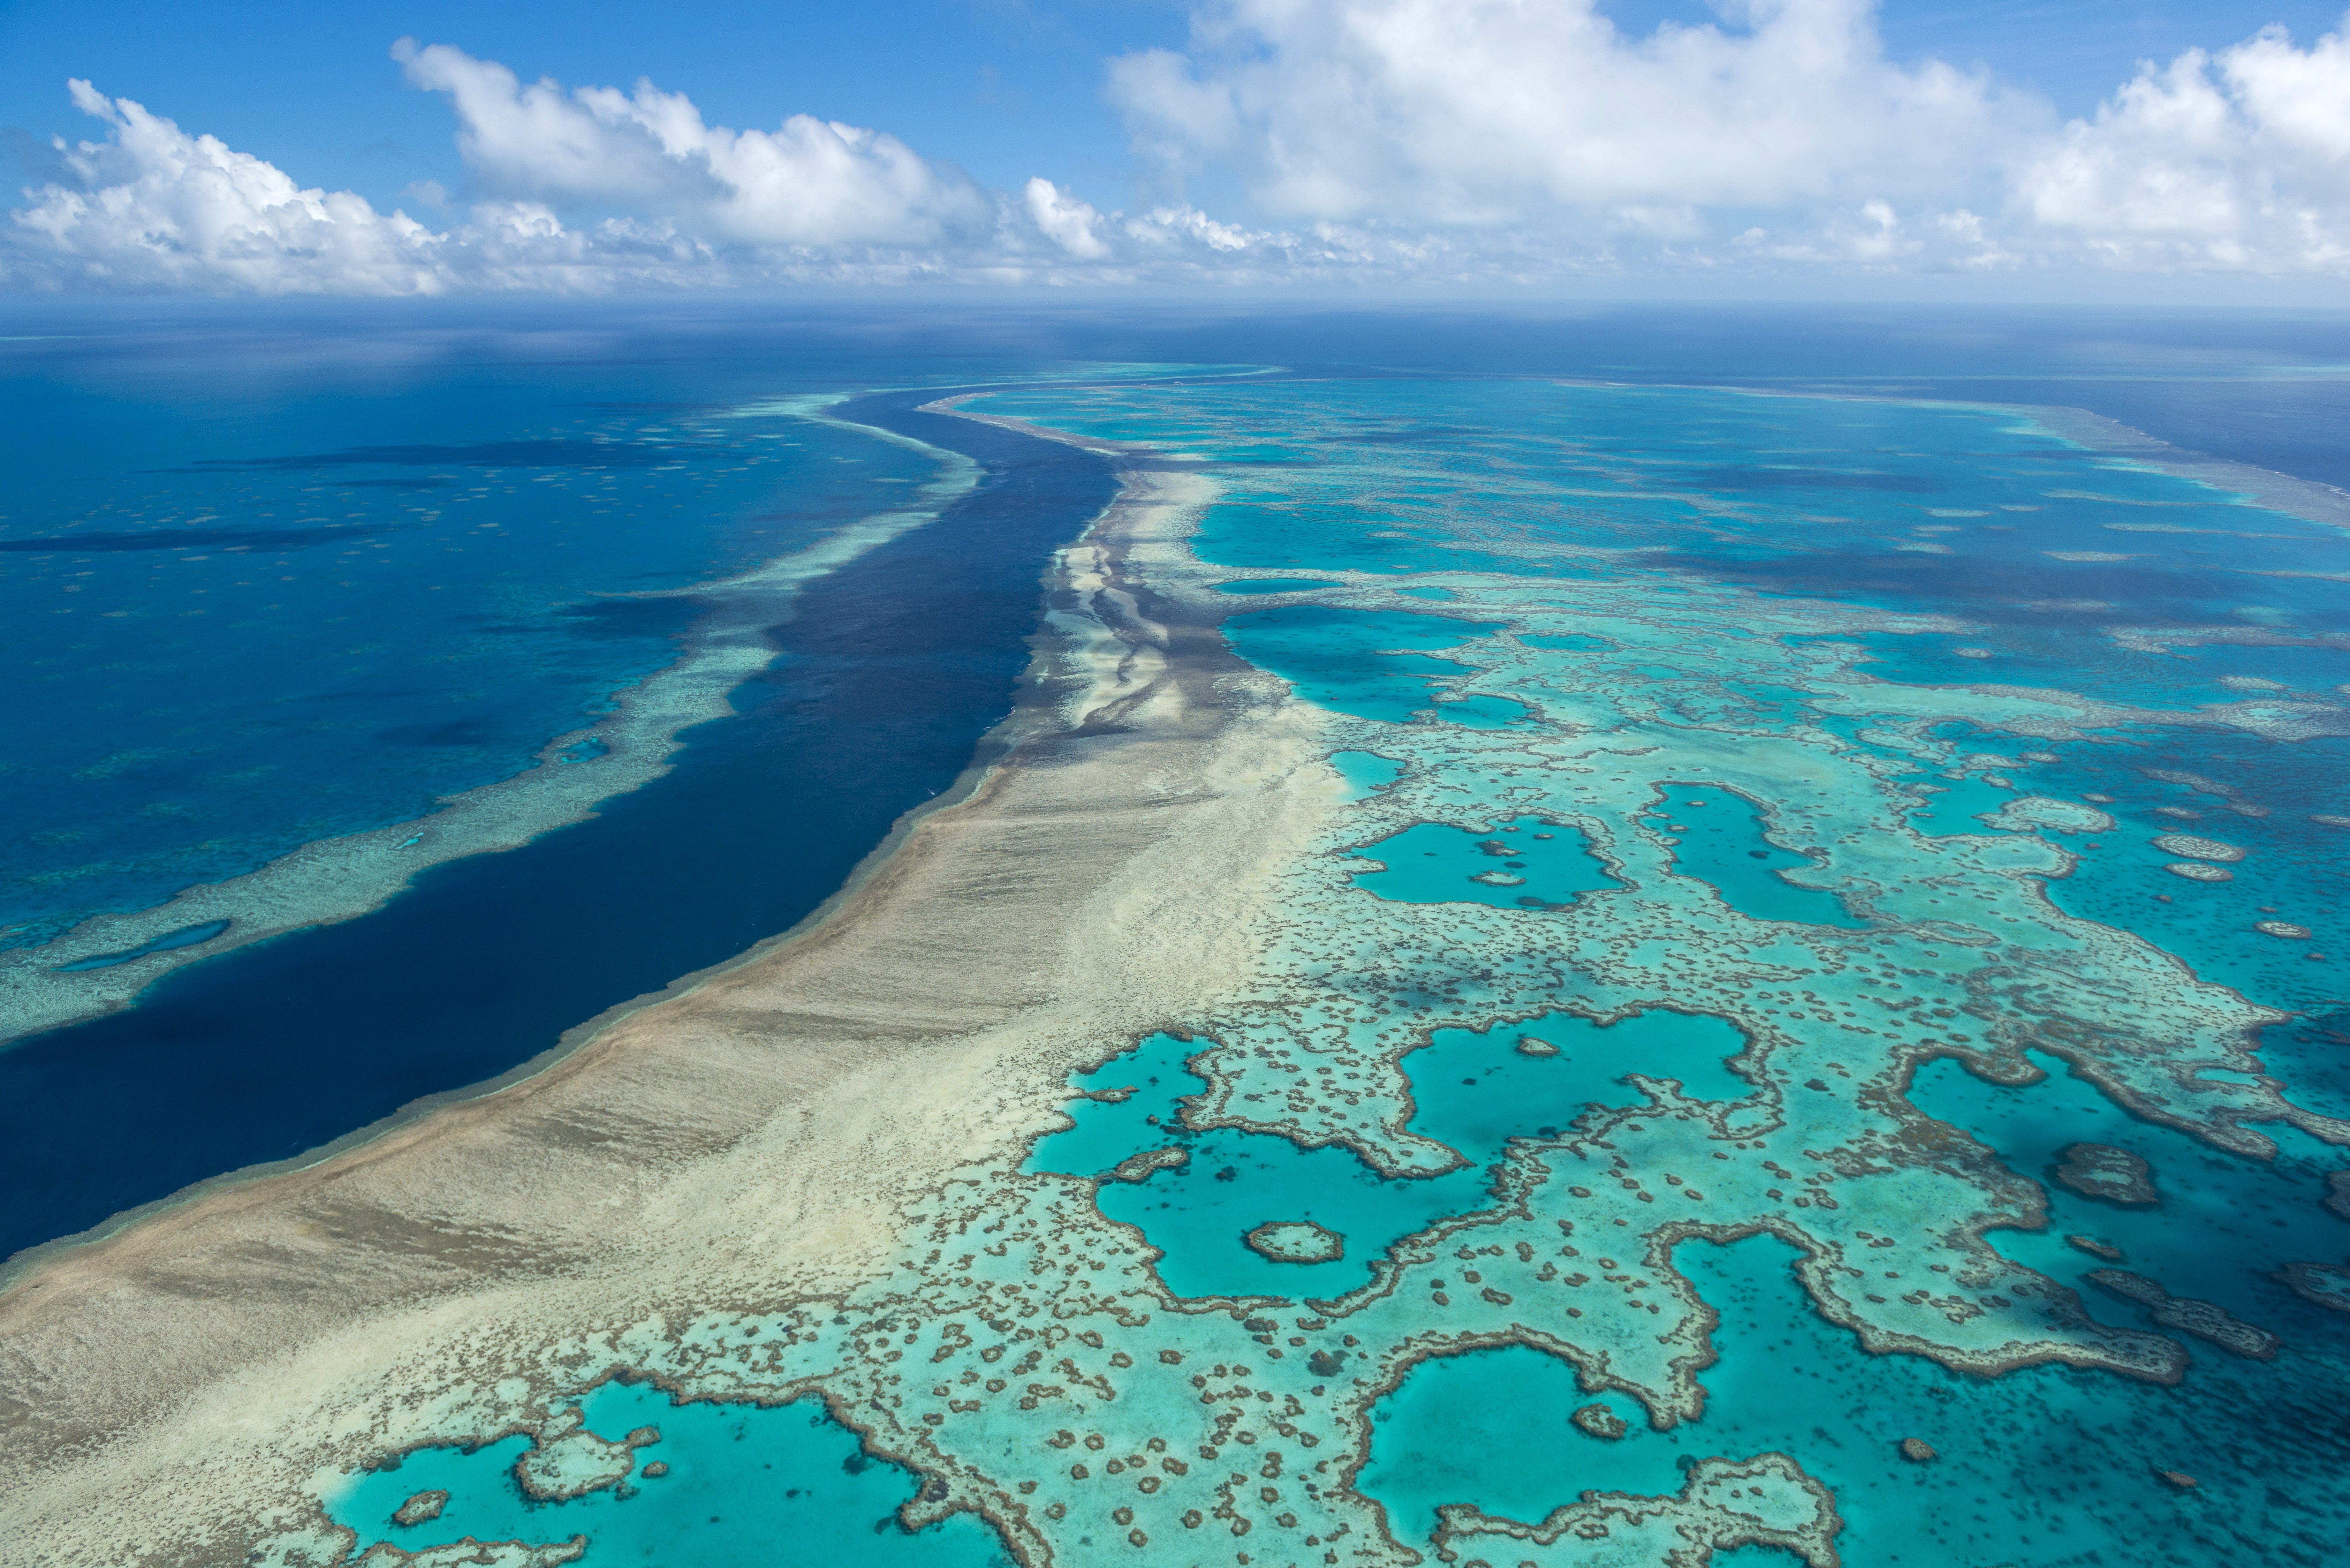 This photo provided by the Great Barrier Reef Marine Park Authority shows the Hardy Reef near the Whitsunday Islands, Australia, June 22, 2014. (Photo via AP)